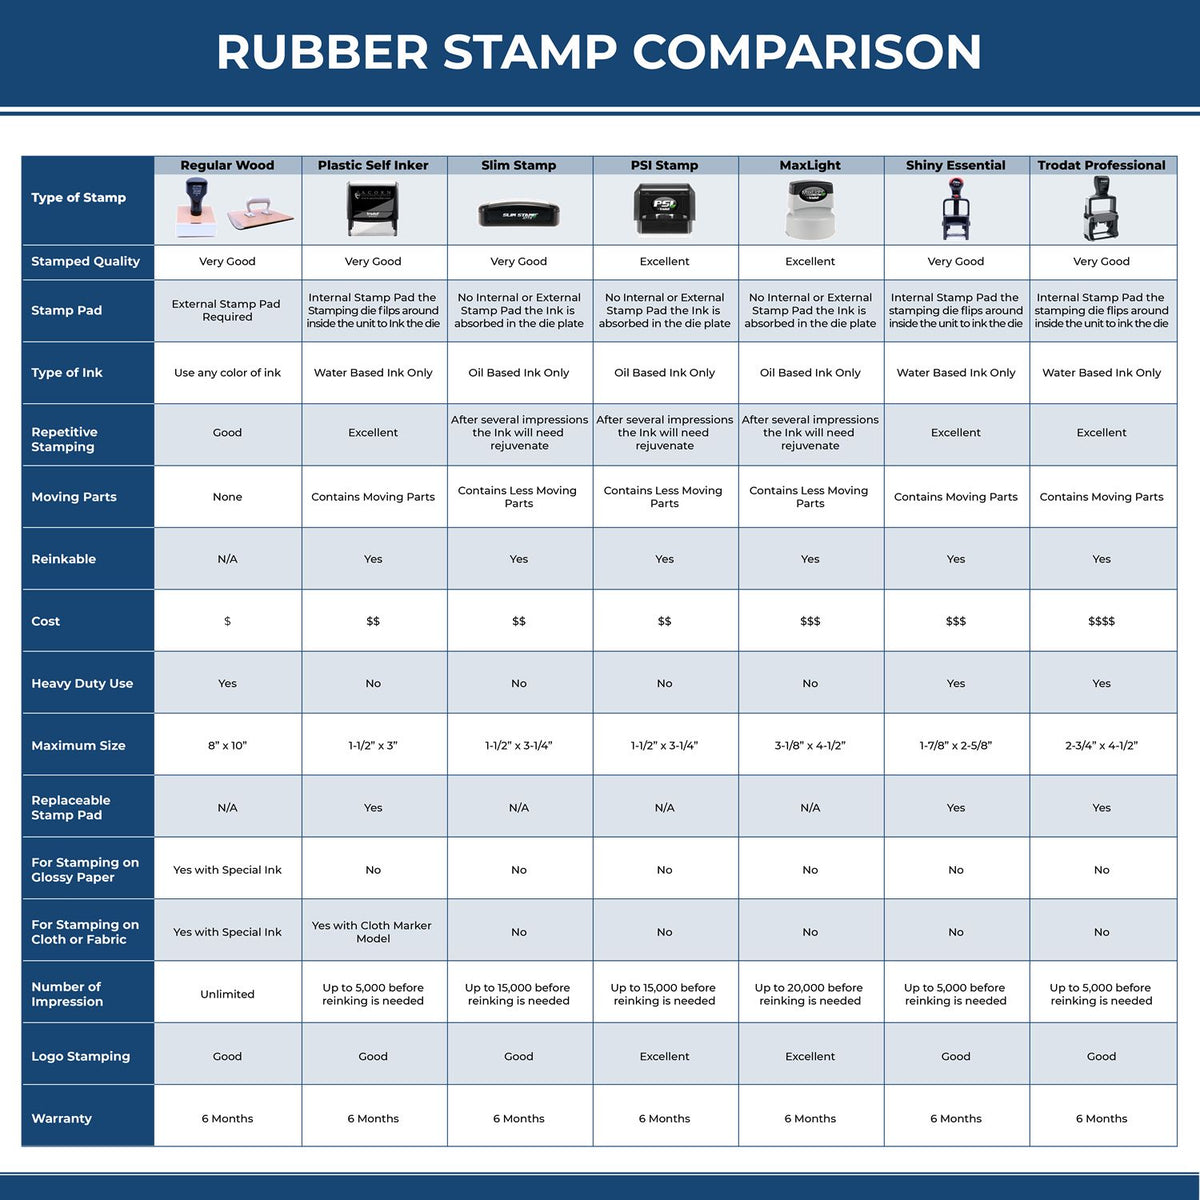 A comparison chart for the different types of mount models available for the Heavy-Duty Iowa Rectangular Notary Stamp.